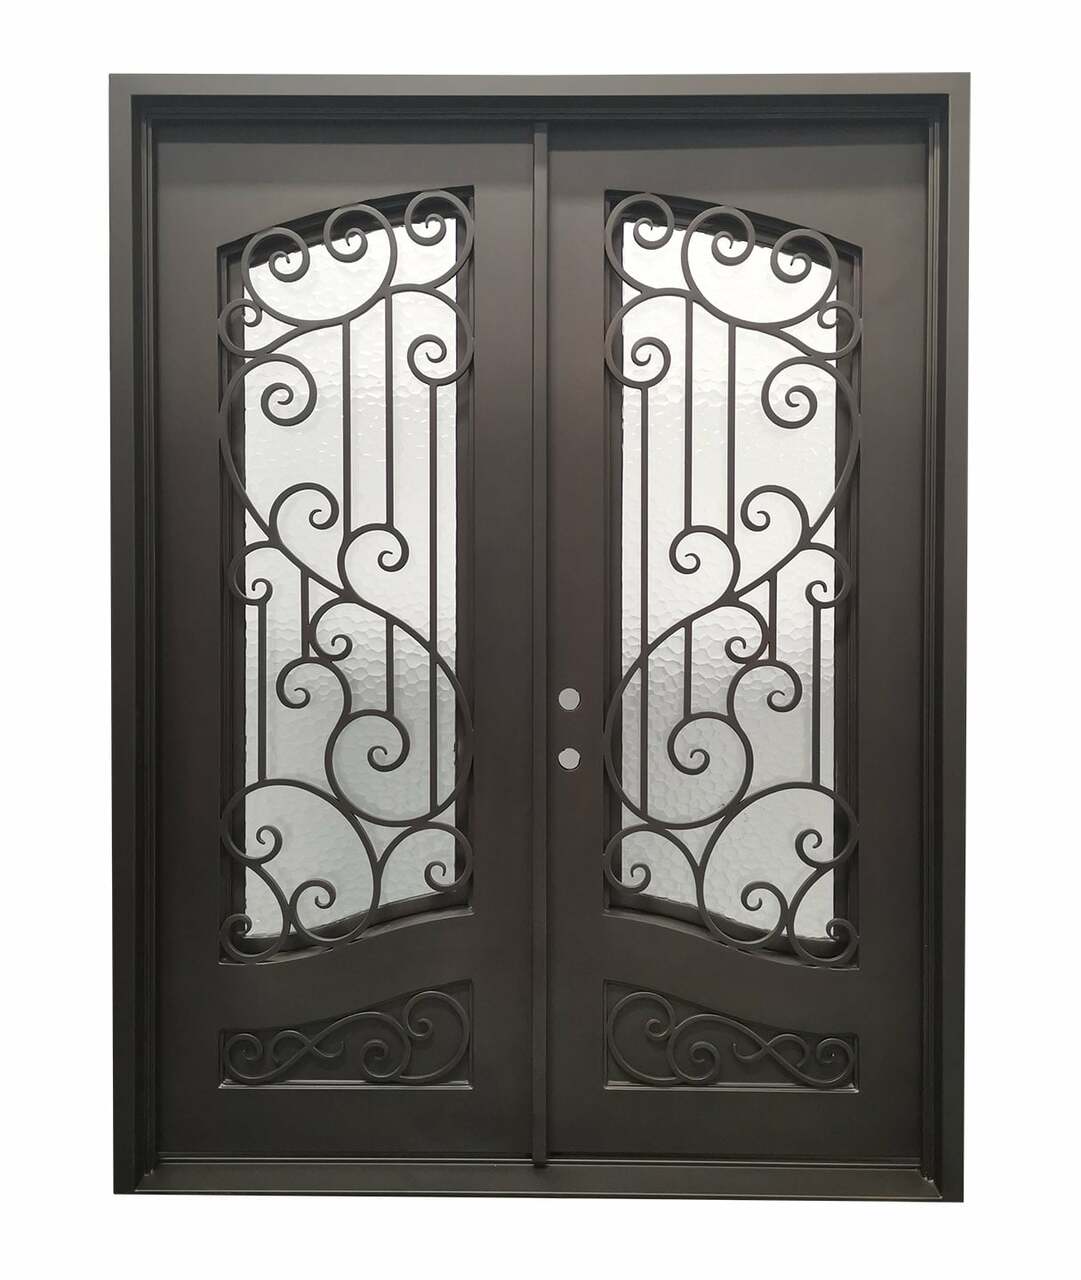  Stella 6 ft. x 8 ft. Wrought Iron Prehung Front Double Door Main Layout Photo